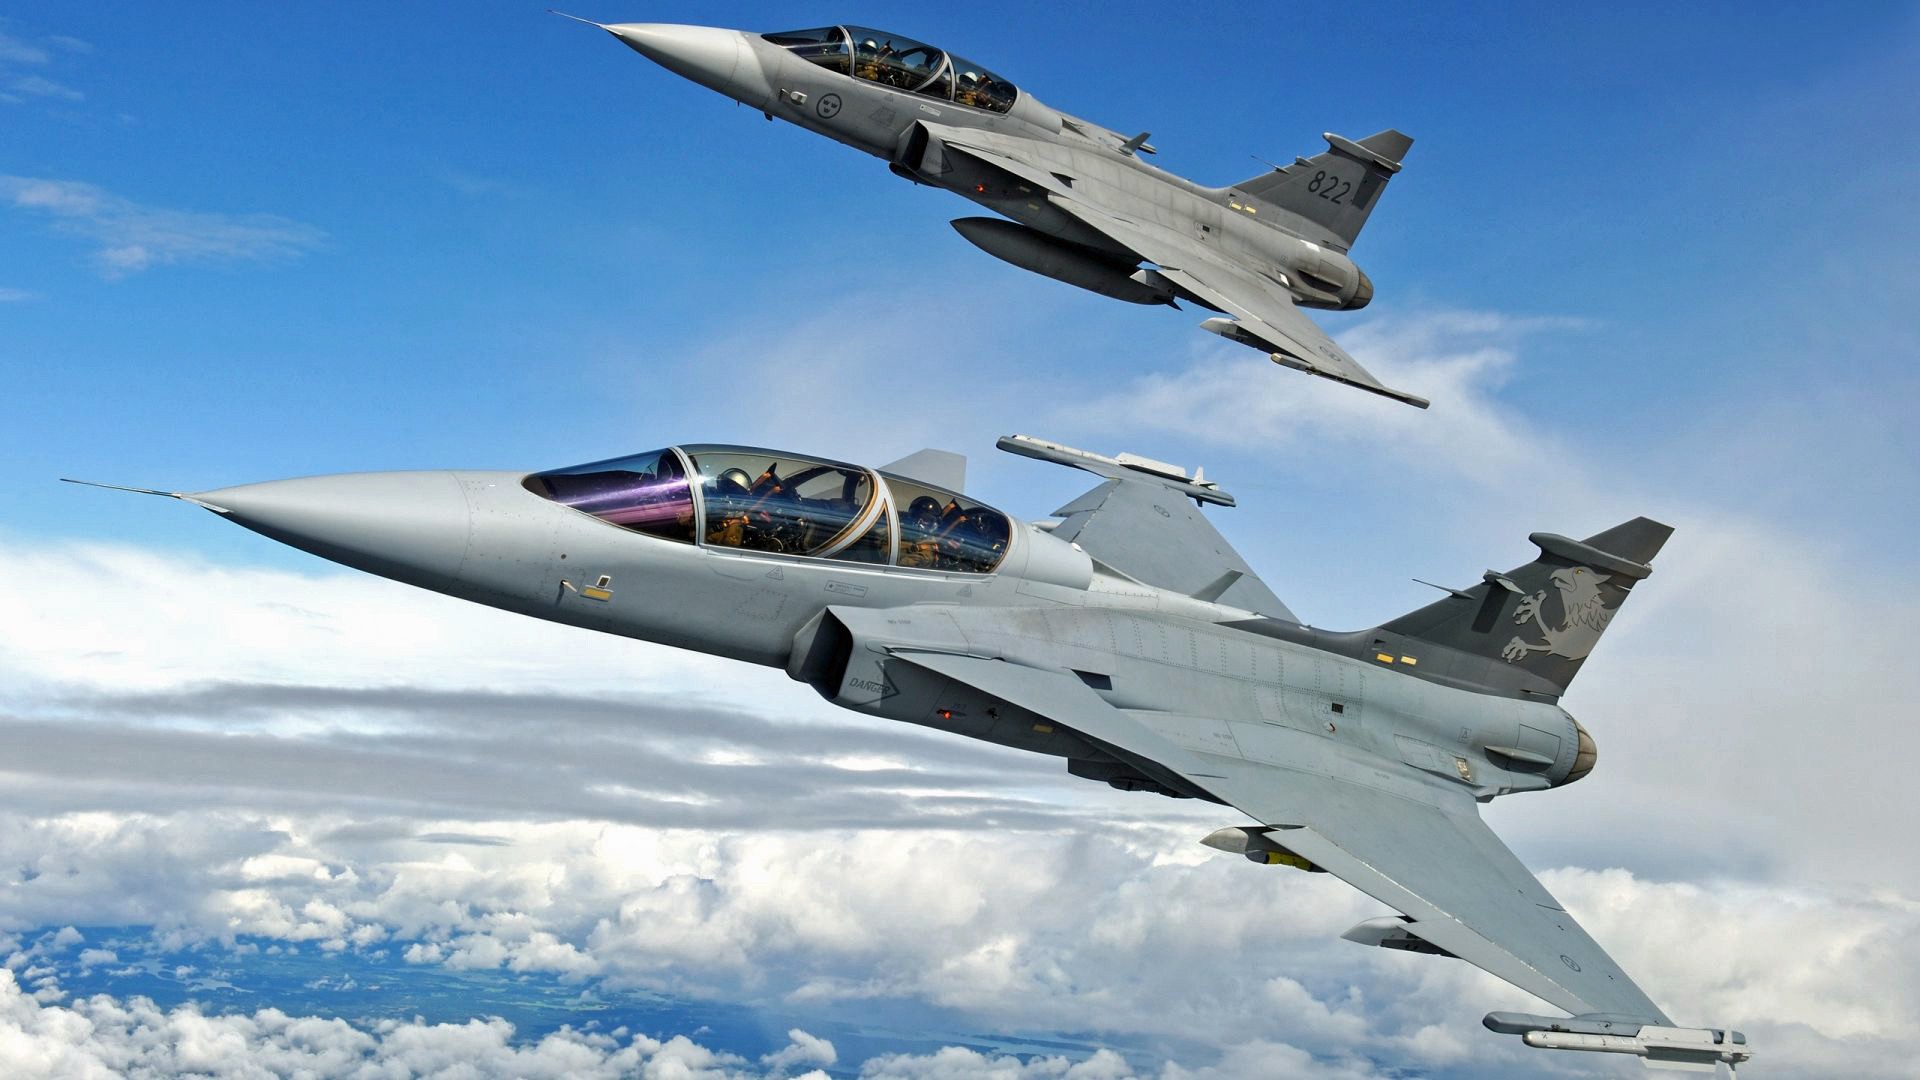 General 1920x1080 military aircraft military Swedish Swedish aircraft jet fighter aircraft sky JAS-39 Gripen clouds flying men helmet missiles